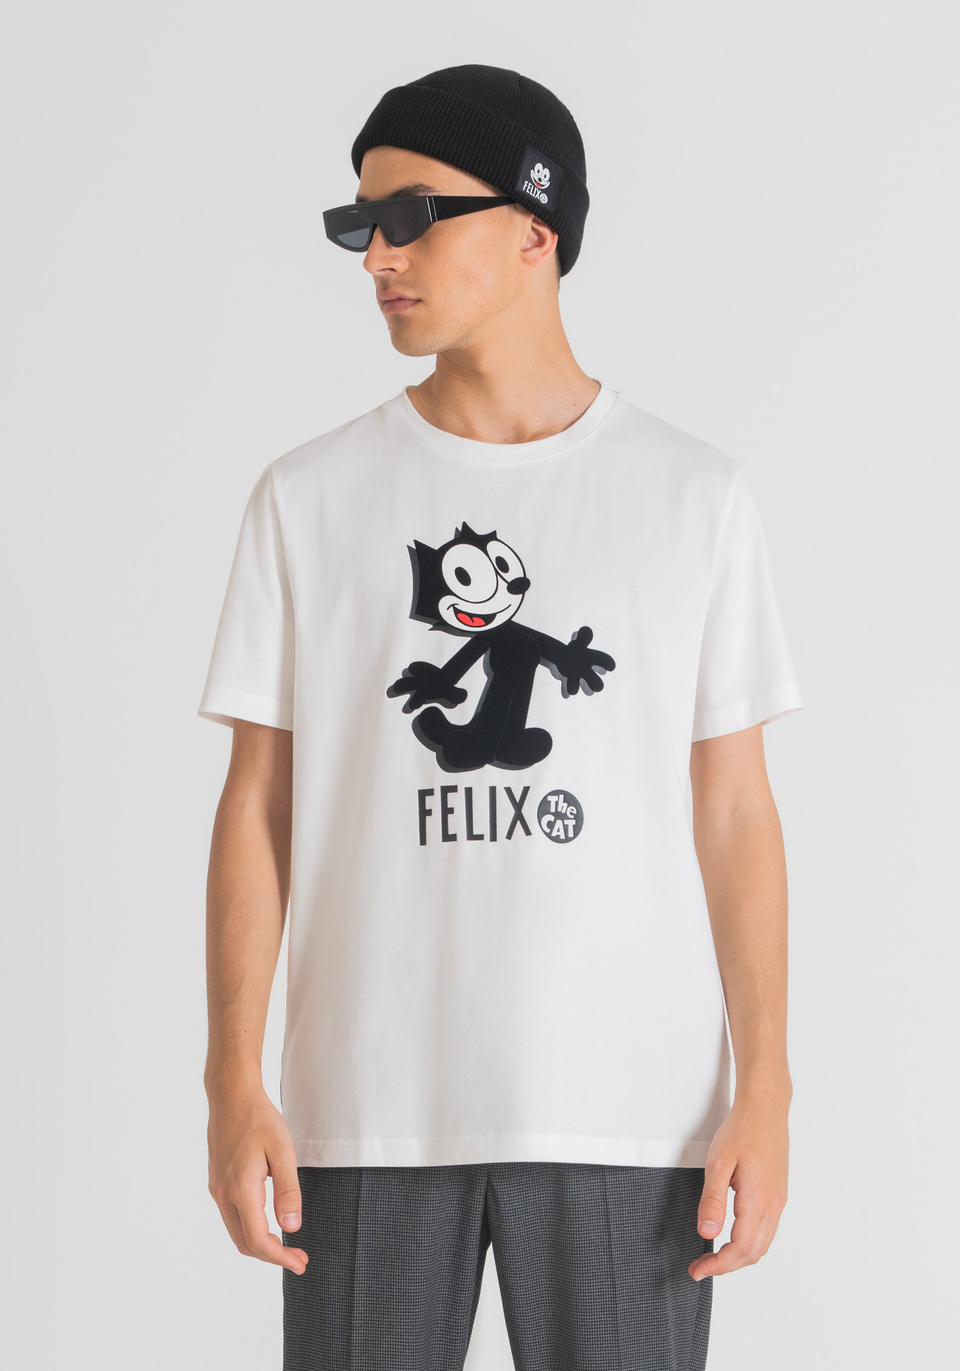 REGULAR-FIT T-SHIRT IN PURE COTTON WITH FRONT FELIX THE CAT PRINT - Antony Morato Online Shop